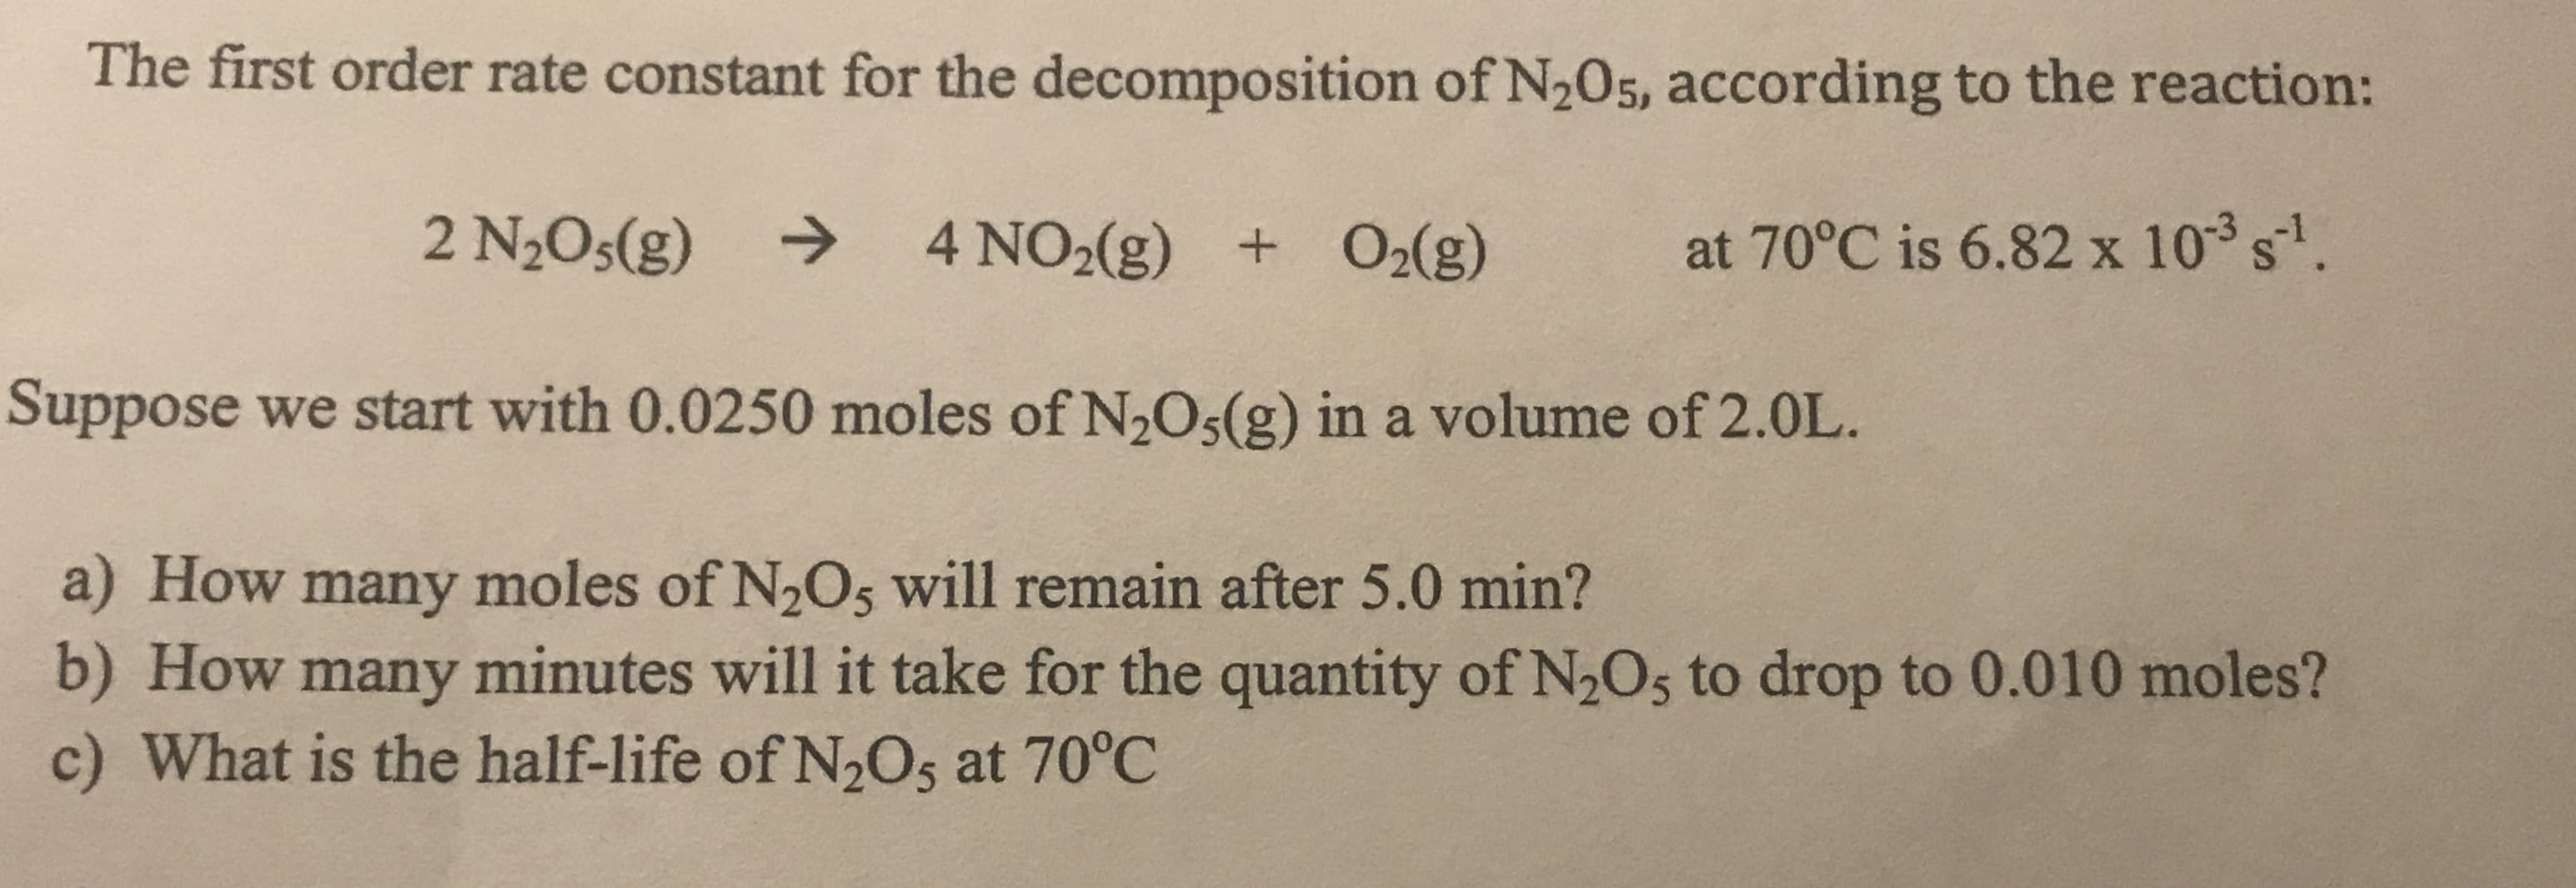 The first order rate constant for the decomposition of N205, according to the reaction:
2 N2O5(g)
->
4 NO2(g) + O2(g)
at 70°C is 6.82 x 103 s.
Suppose we start with 0.0250 moles of N,Os(g) in a volume of 2.0L.
a) How many moles of N2O5 will remain after 5.0 min?
b) How many minutes will it take for the quantity of N2Os to drop to 0.010 moles?
c) What is the half-life of N,Os at 70°C
